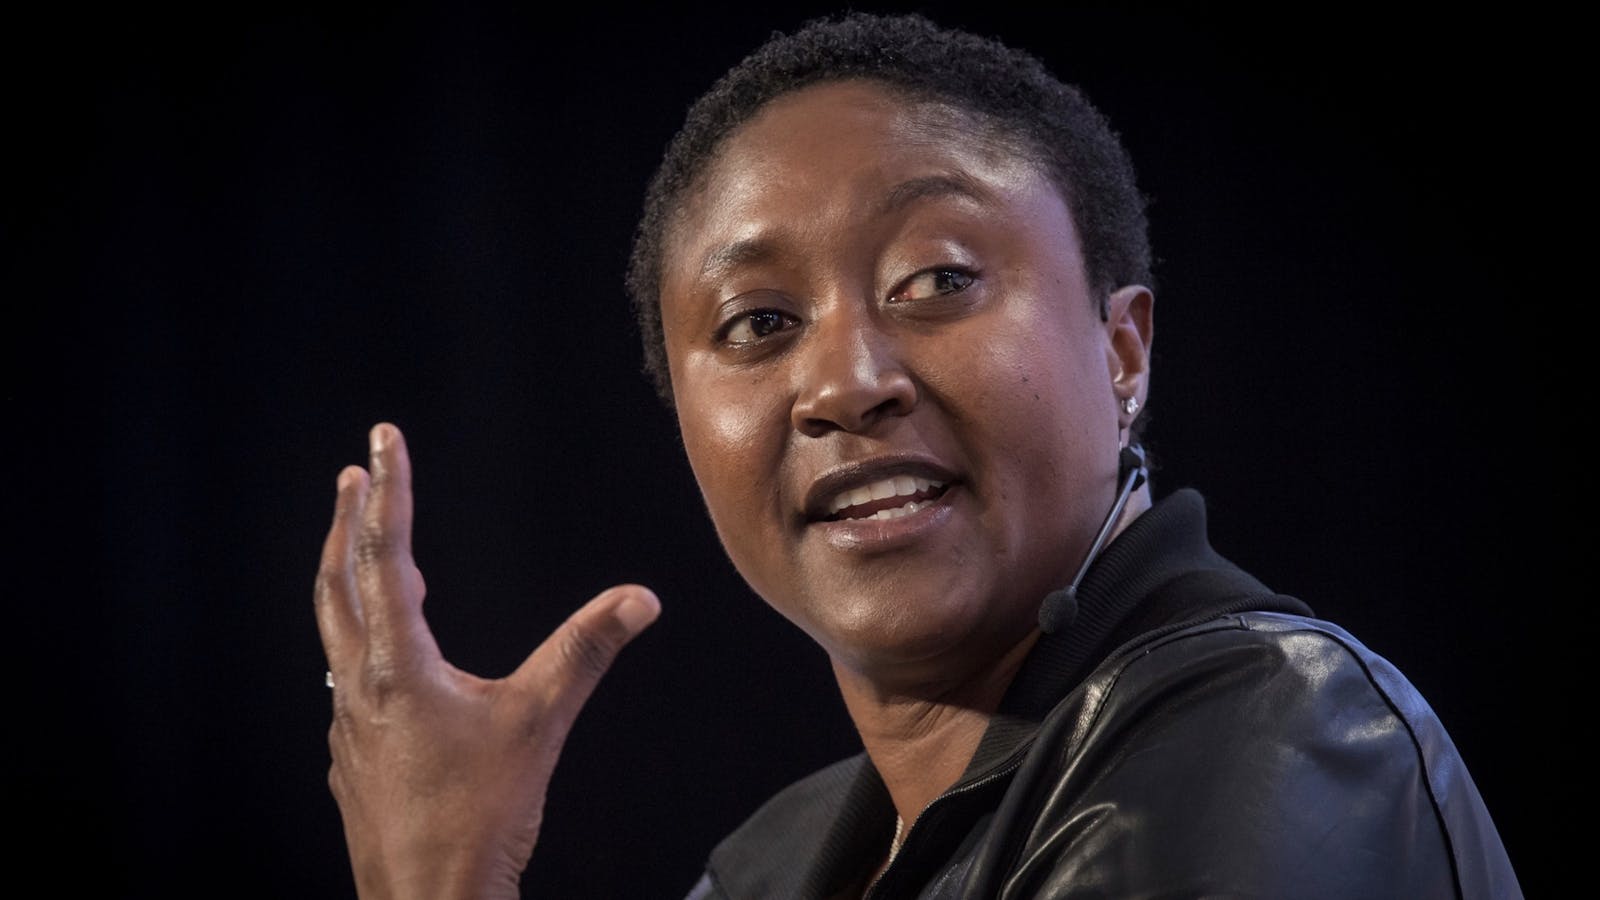 Zoox CEO Aicha Evans. Photo by Bloomberg